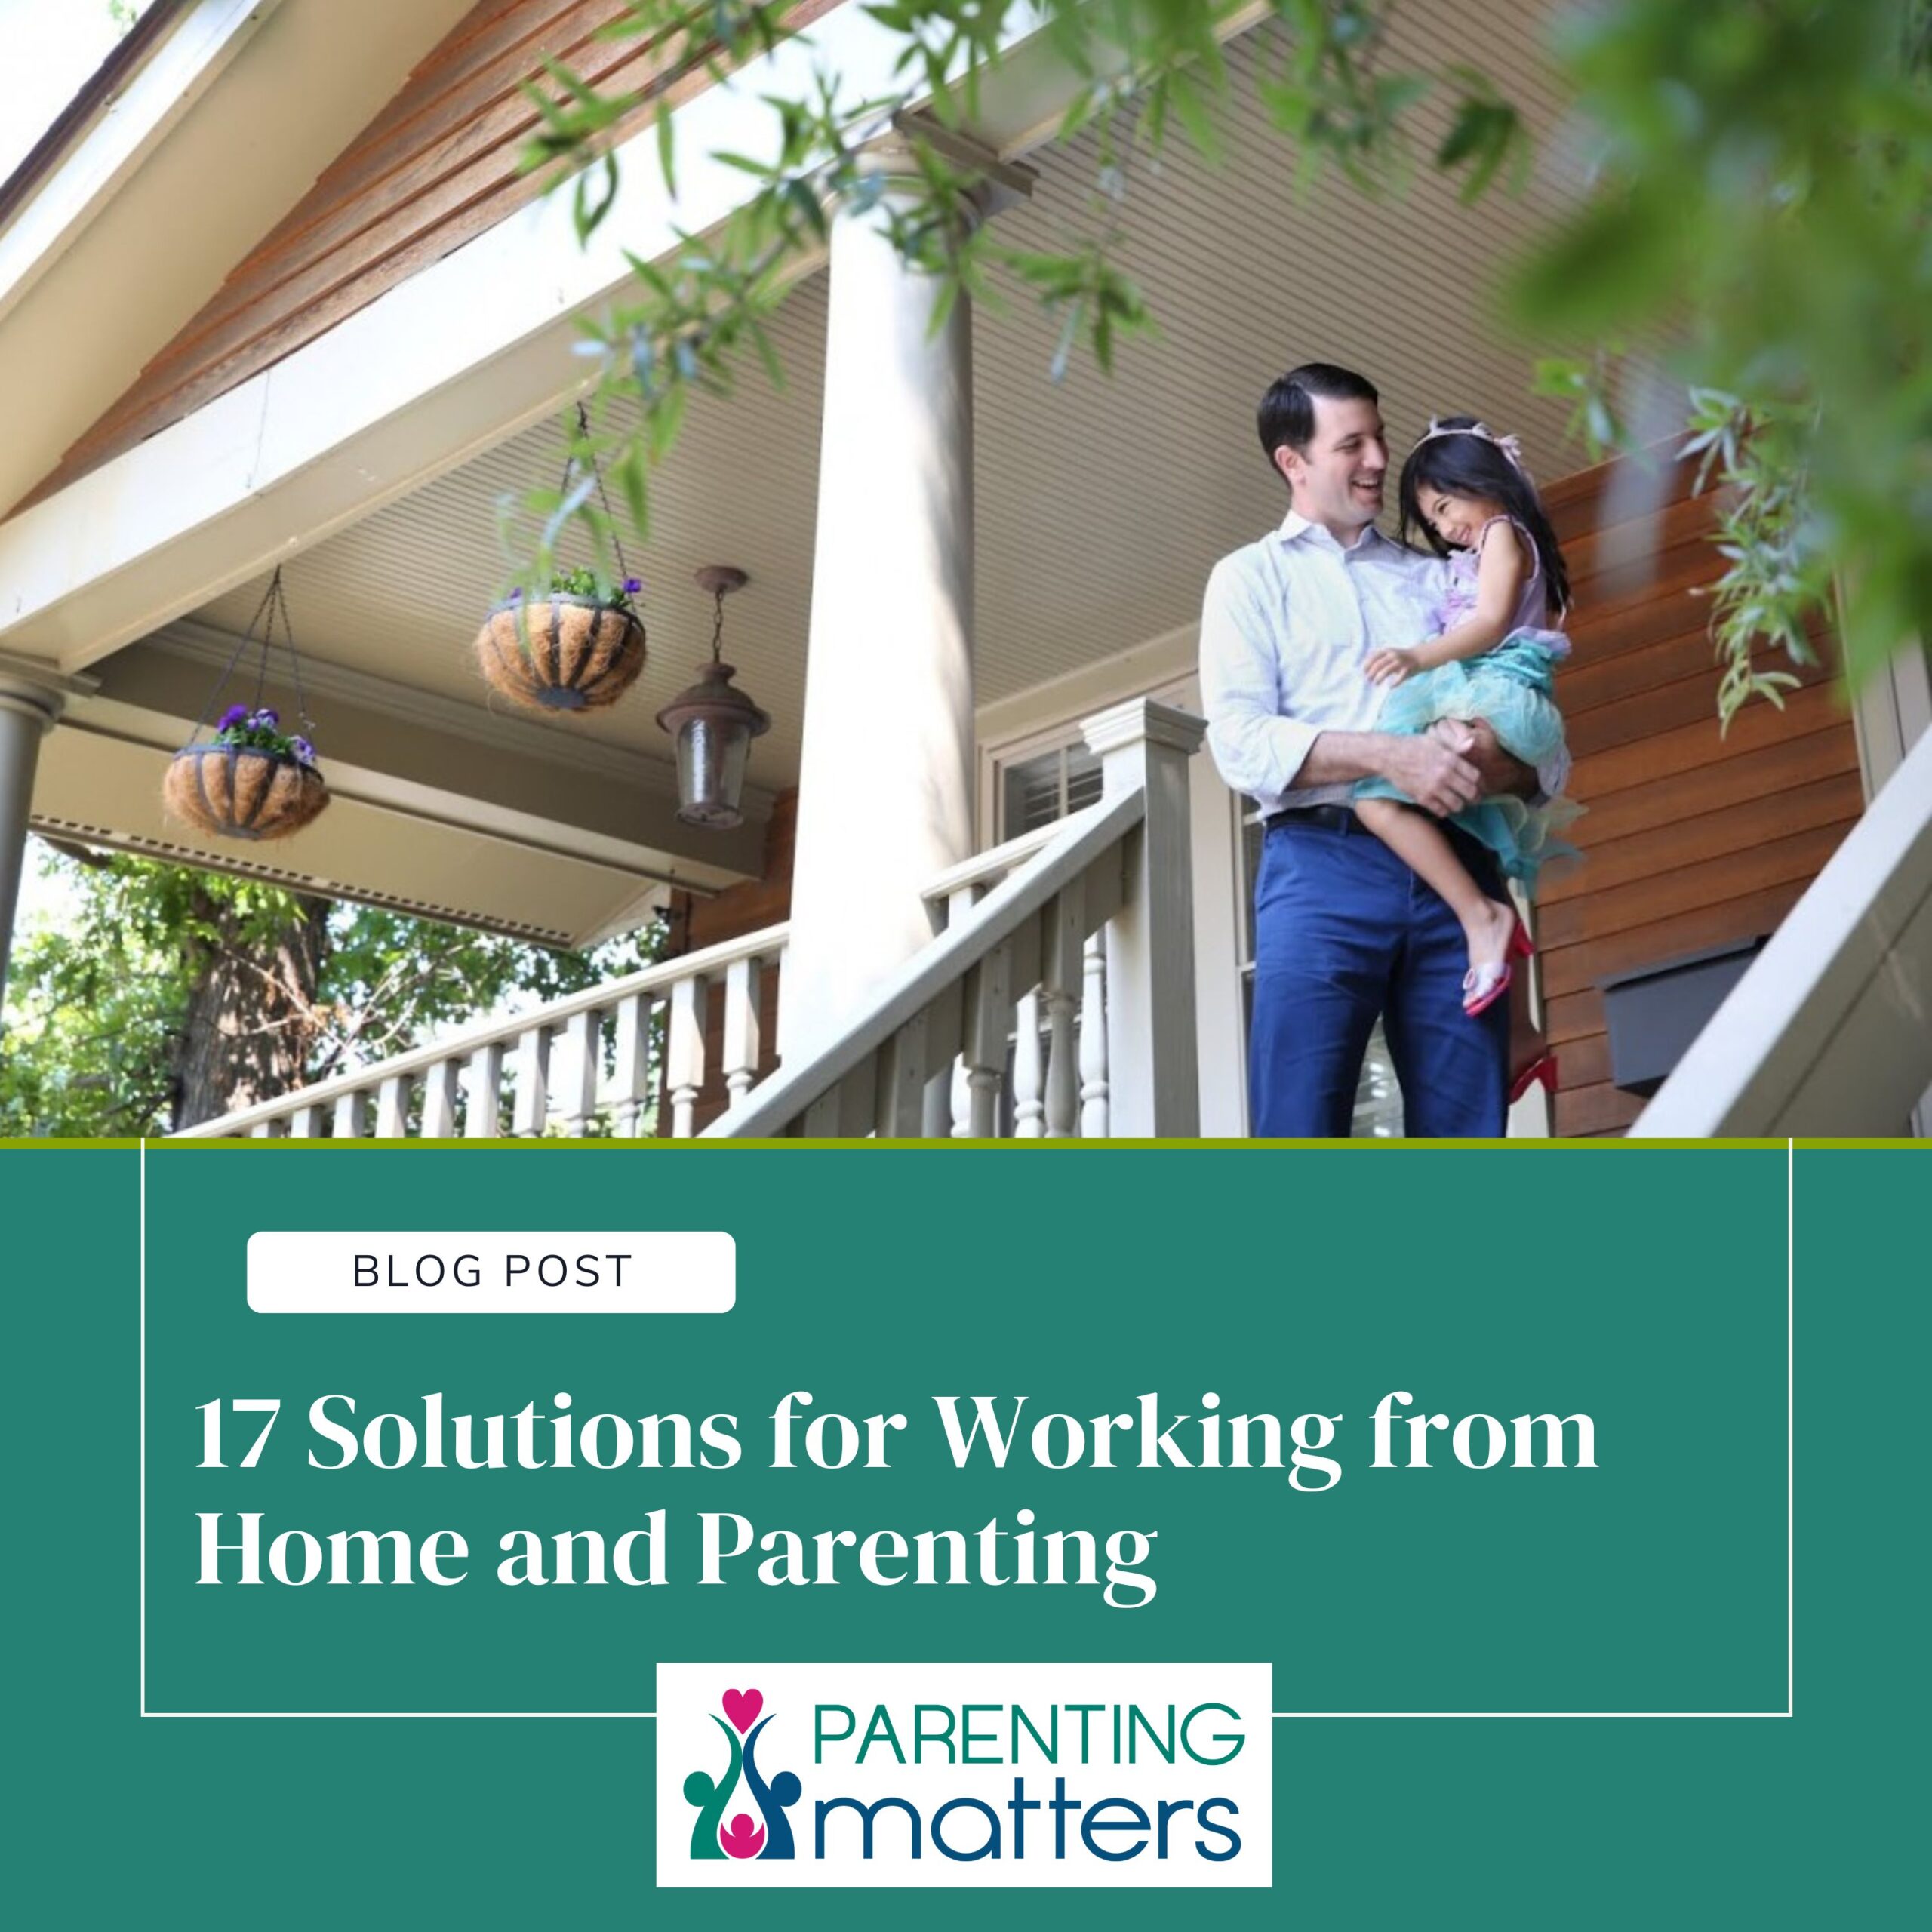 17-solutions-for-working-from-home-and-parenting-parenting-matters